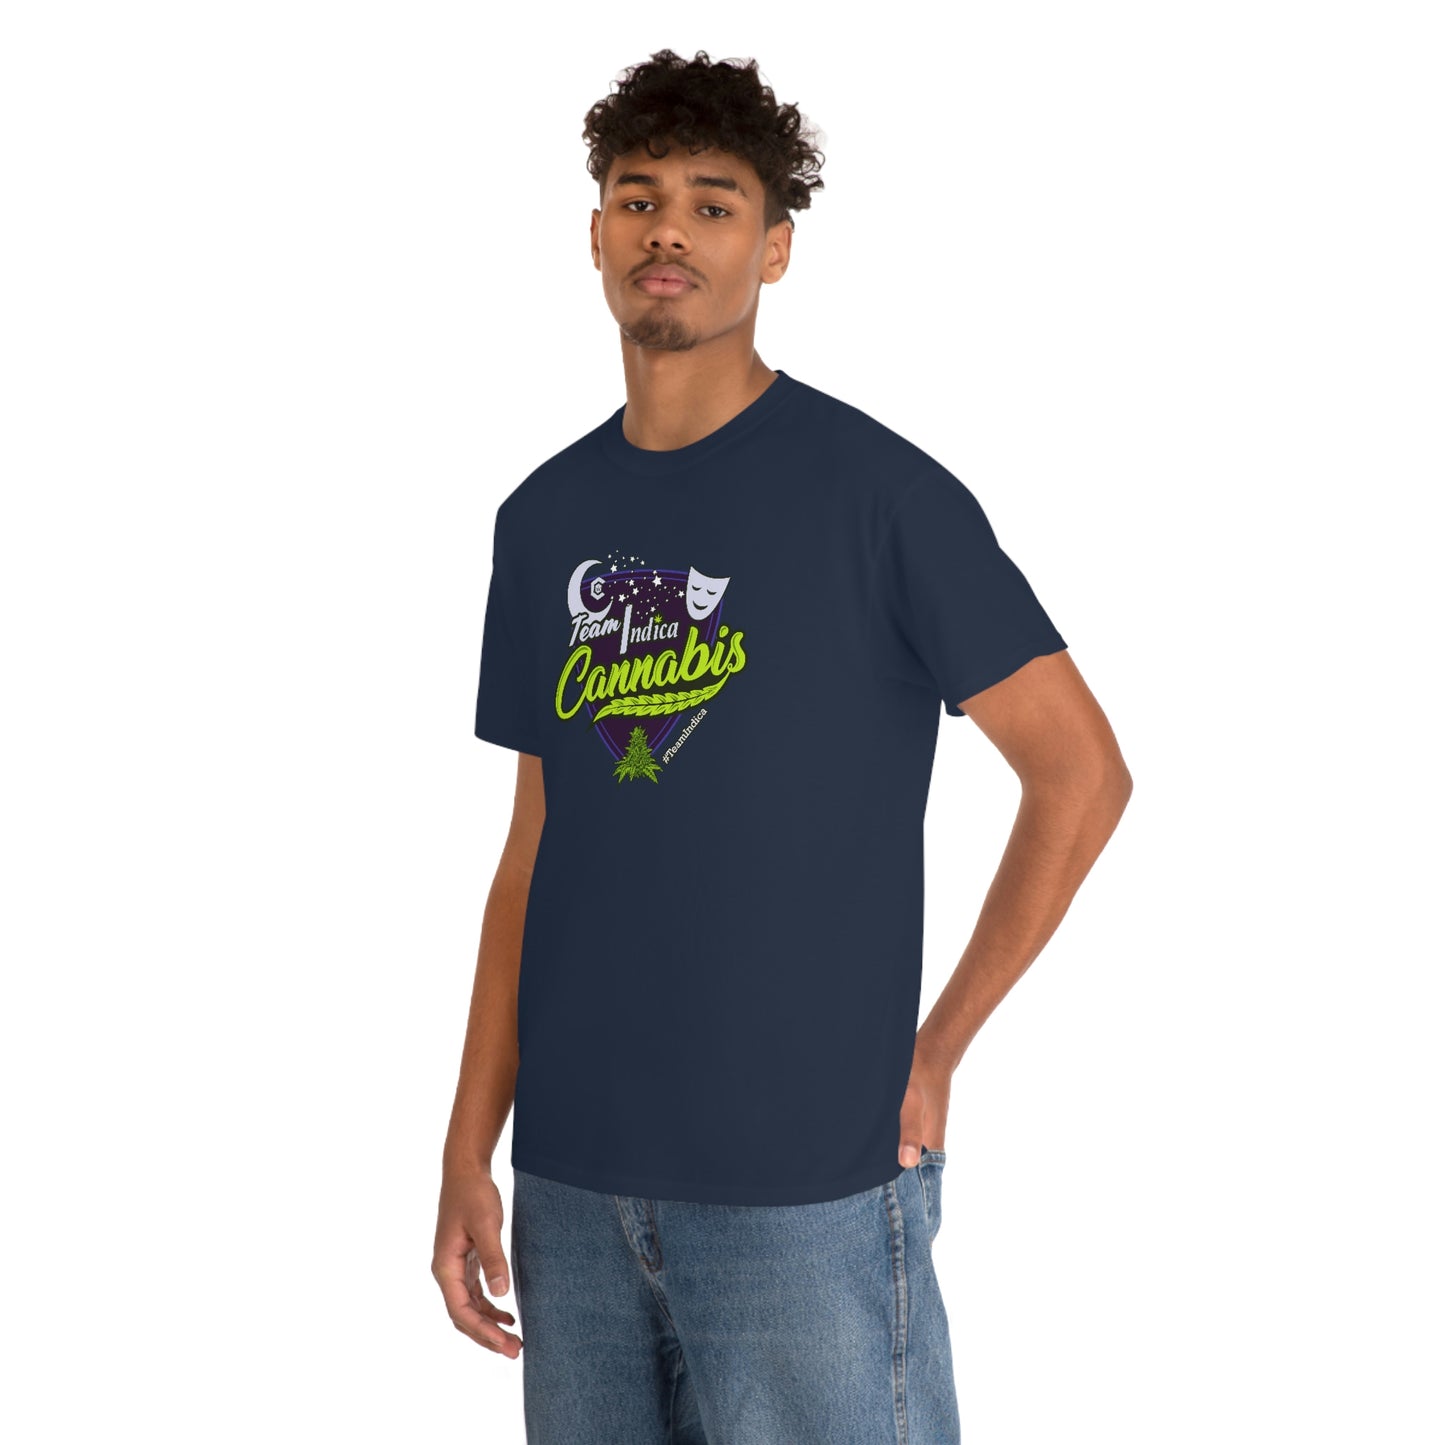 a young man wearing a navy Team Indica Cannabis T-Shirt with the word 'cannabis' on it.